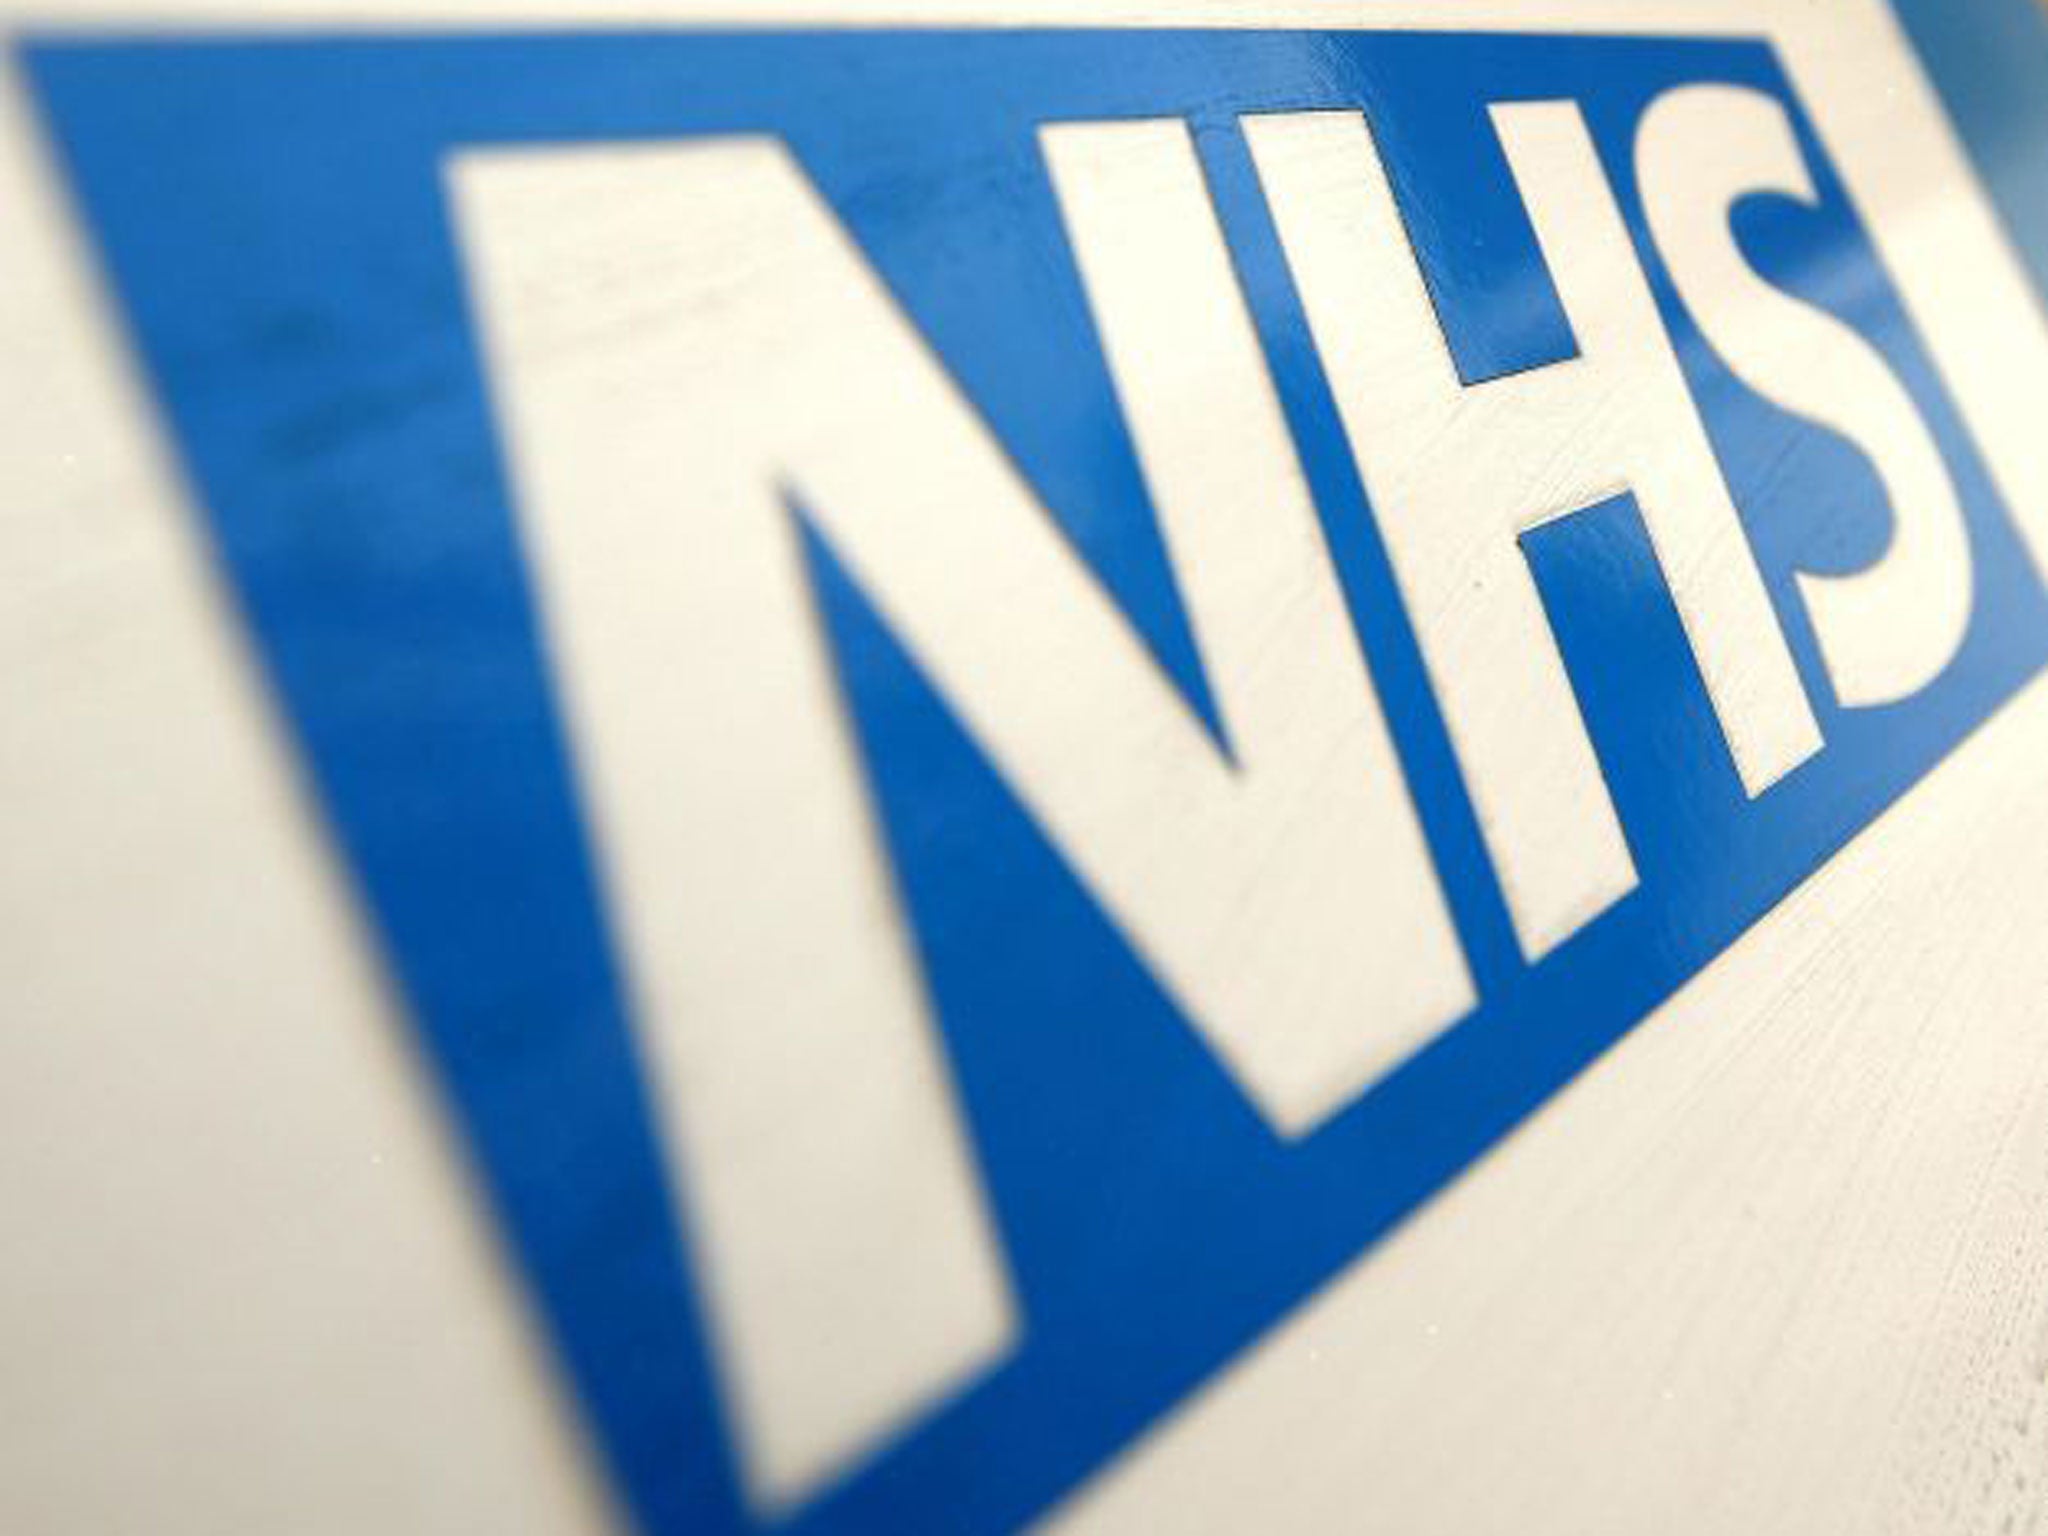 The NHS needs to “think like a patient” but “act like a taxpayer”